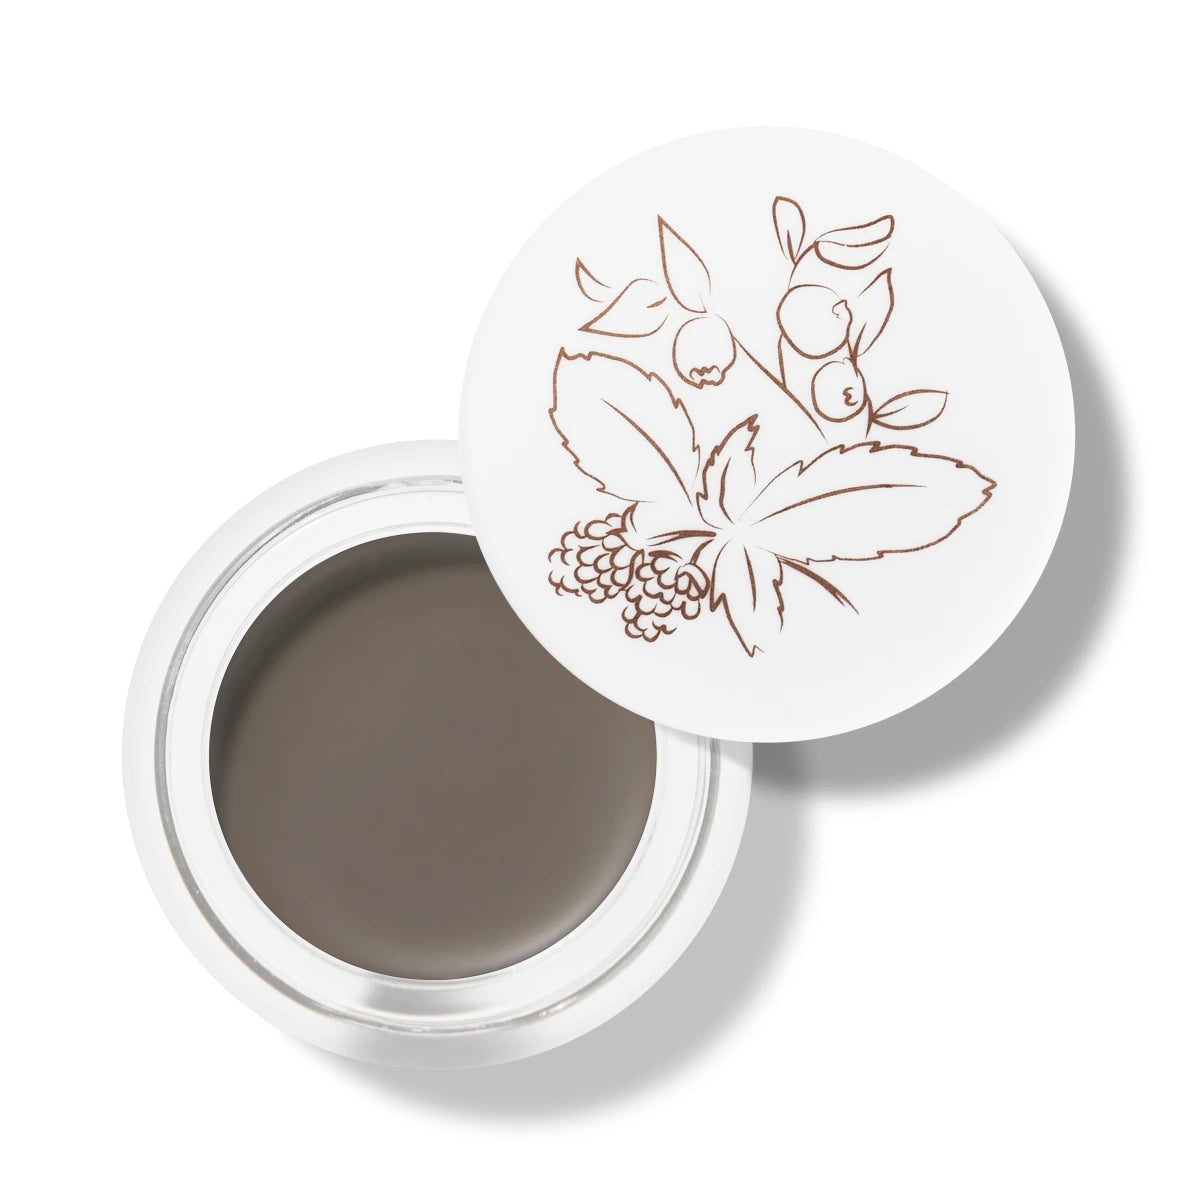 100%_pure_the_skincare_district_uae_middle_east_Long_Last_Brows_Taupe_Primary